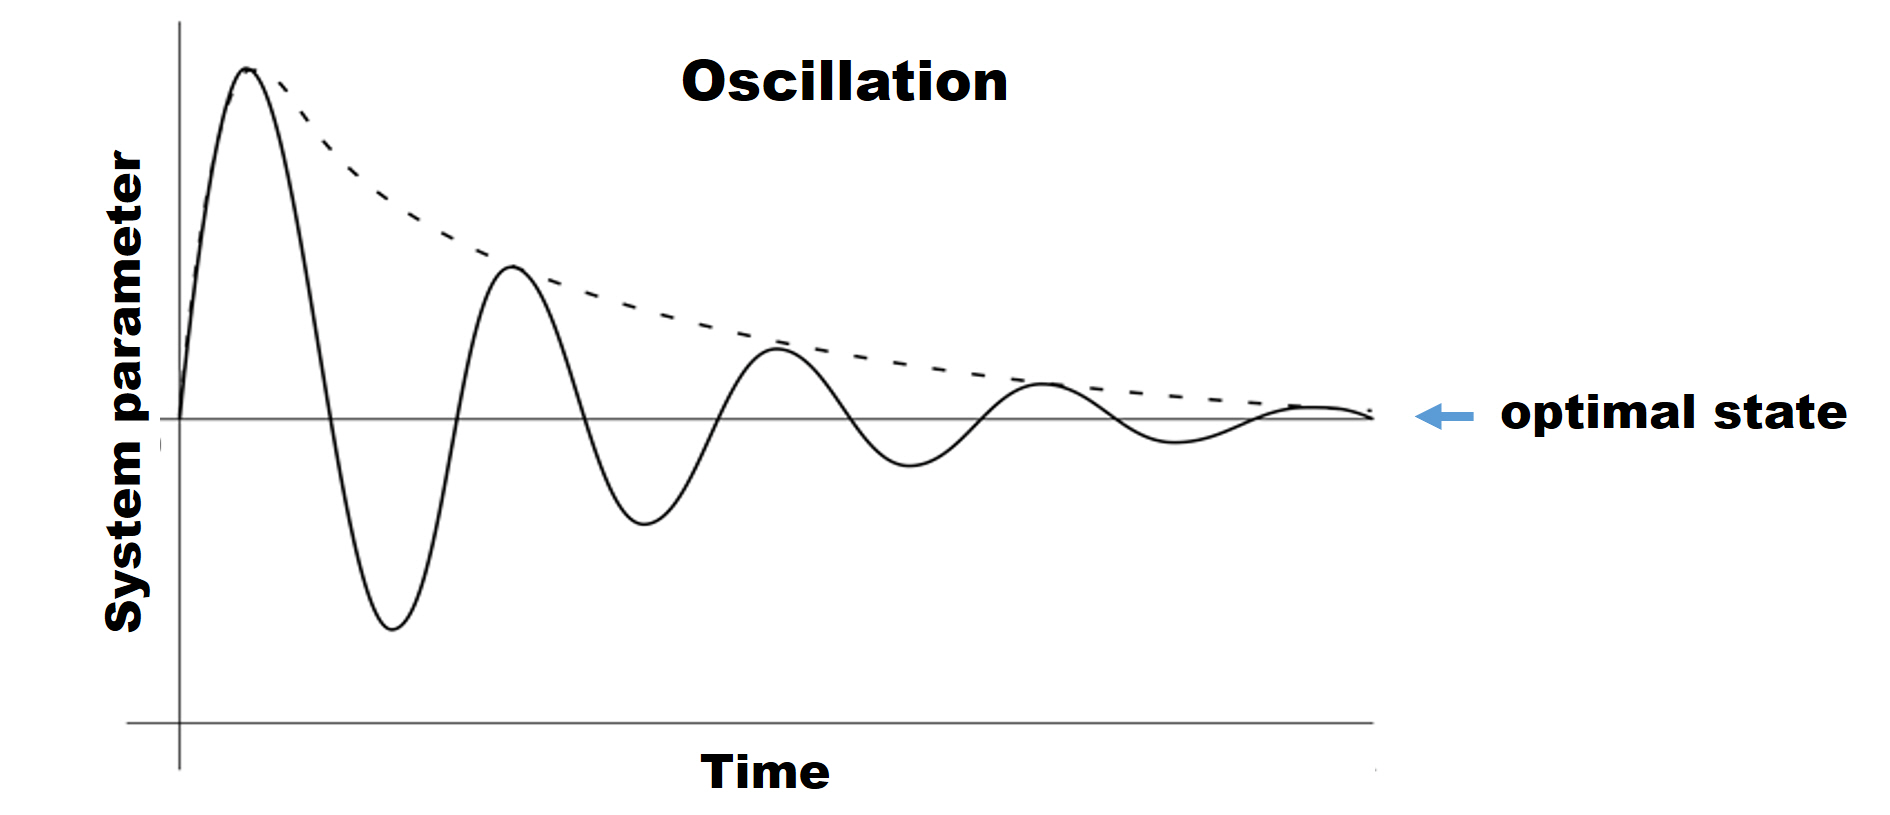 Oscillation curve showing system stabilization over time